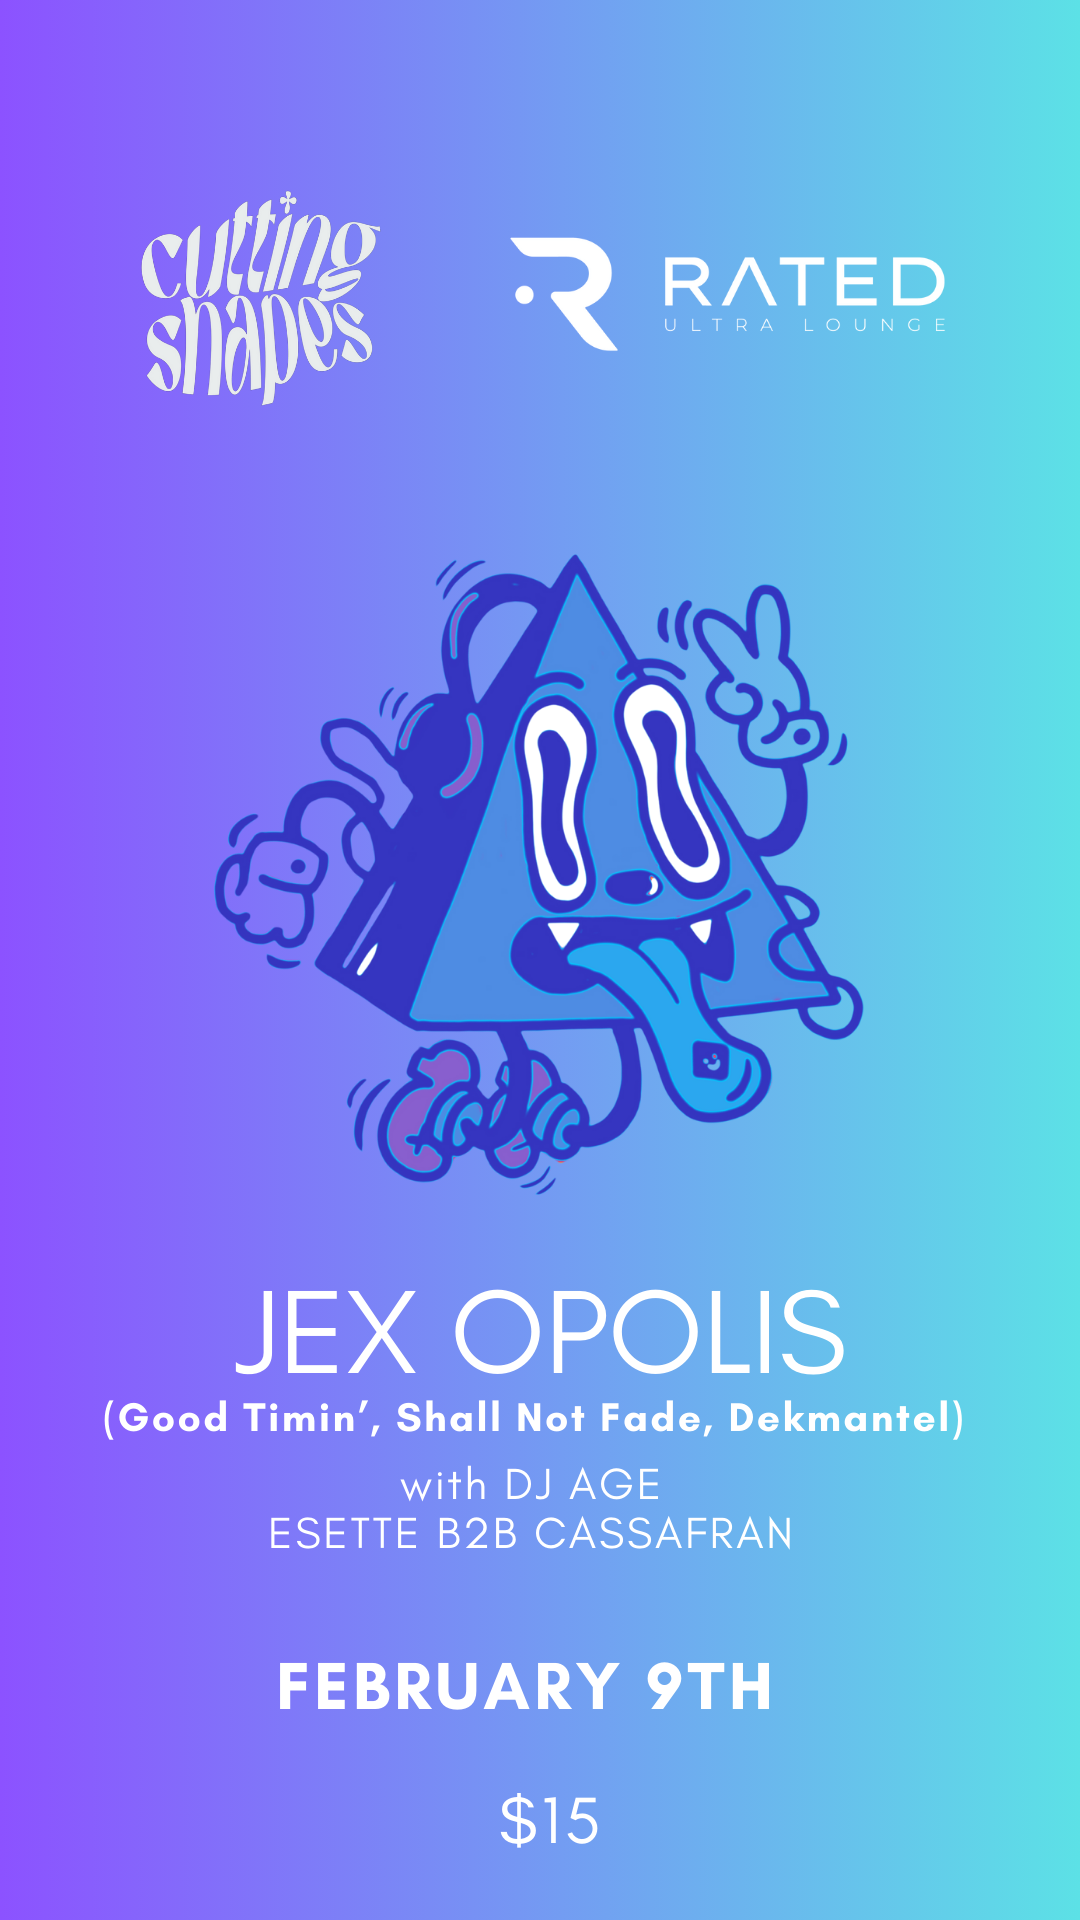 Cutting Shapes presents: Jex Opolis at Rated - フライヤー表